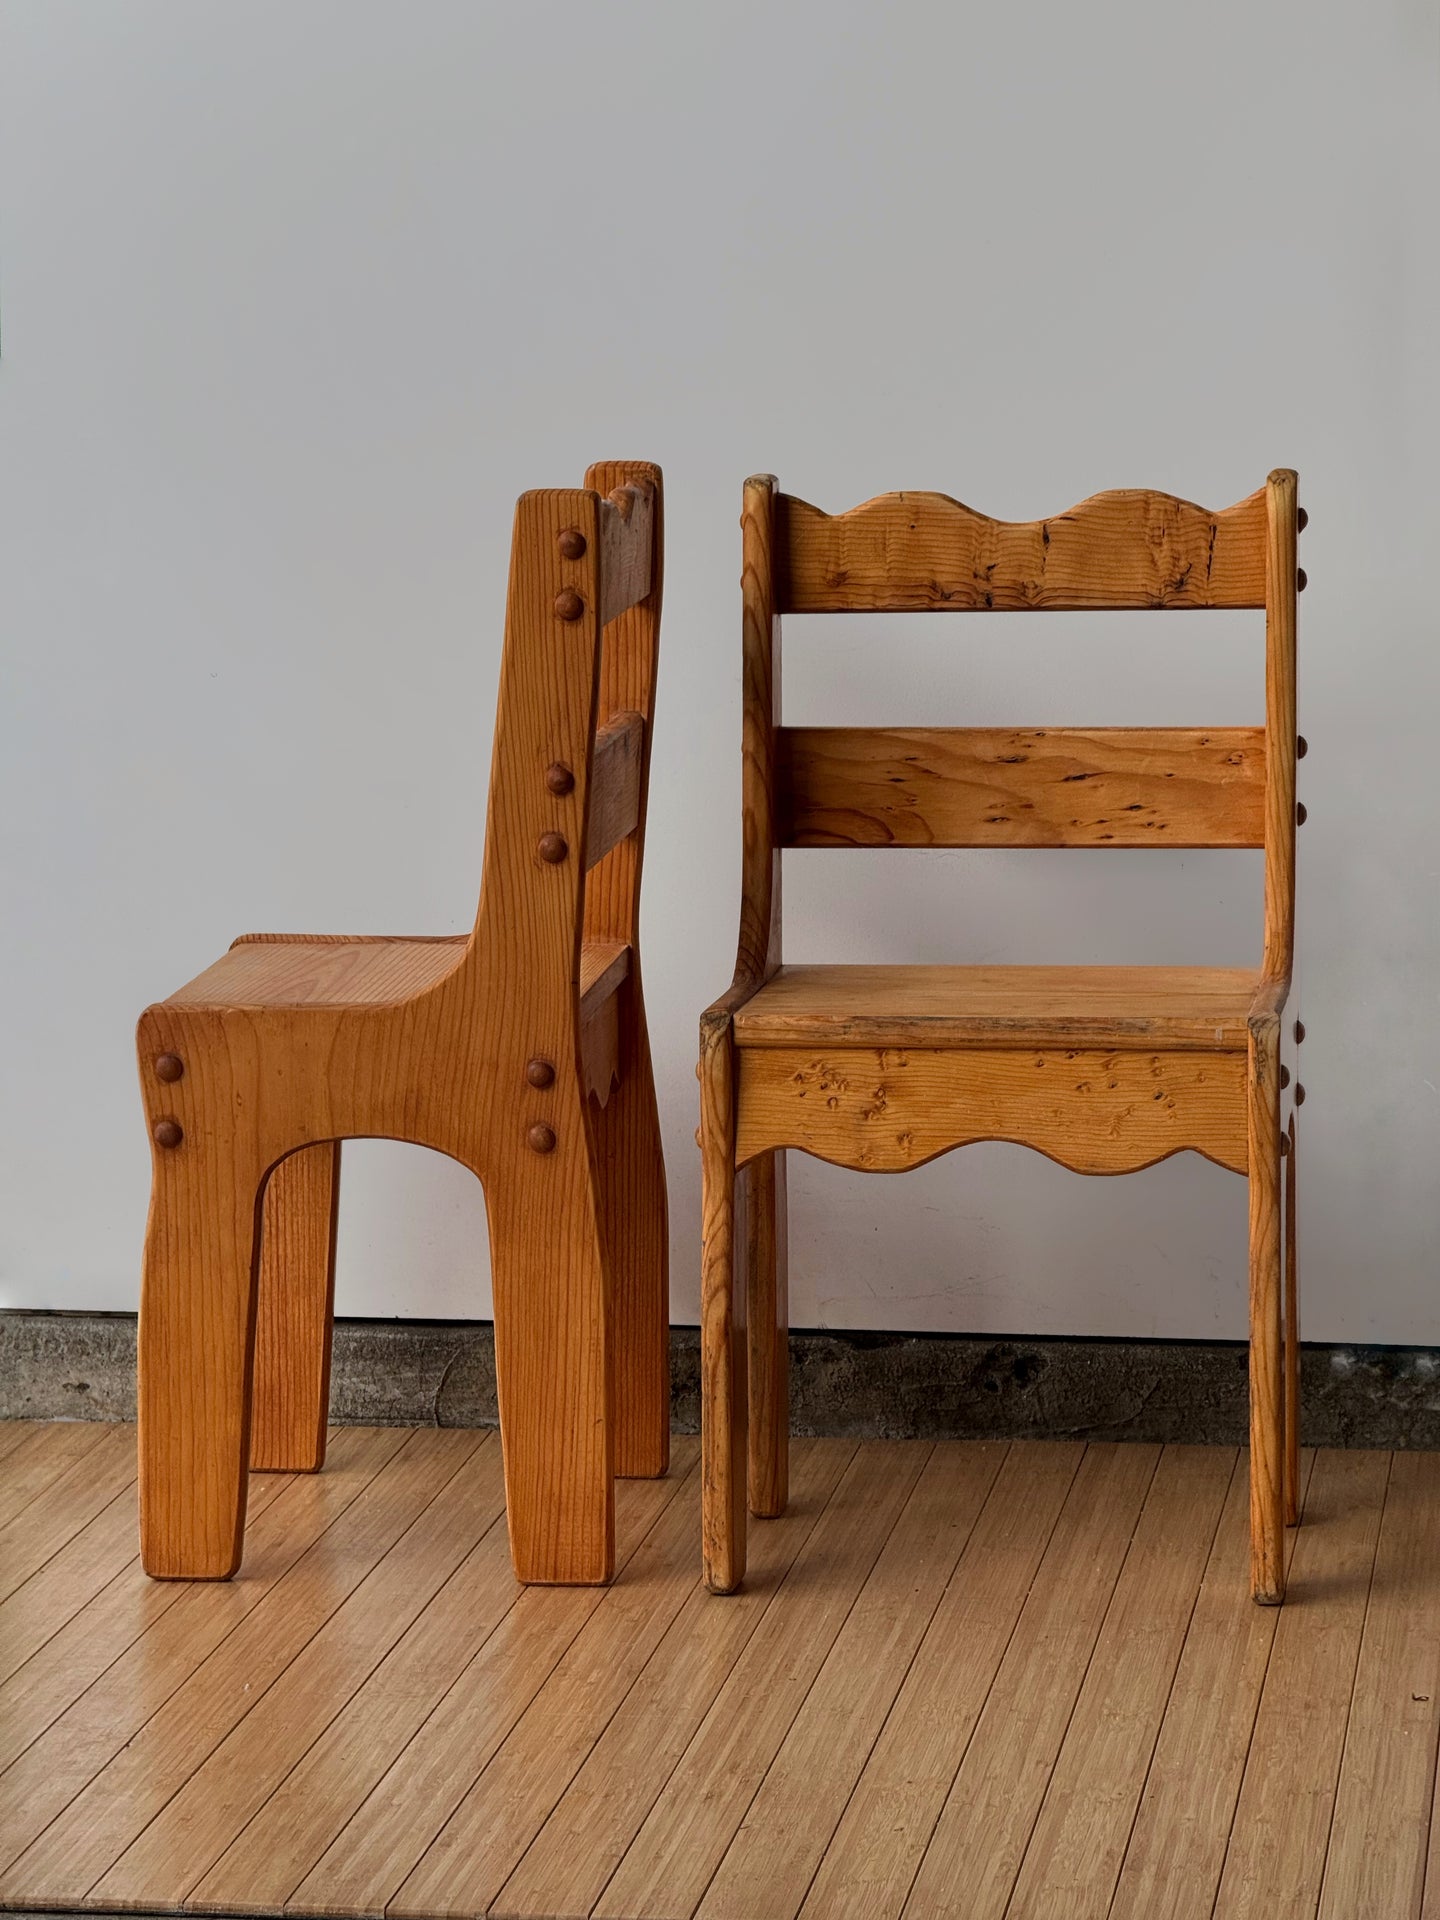 Vintage Handcrafted Children’s Chairs